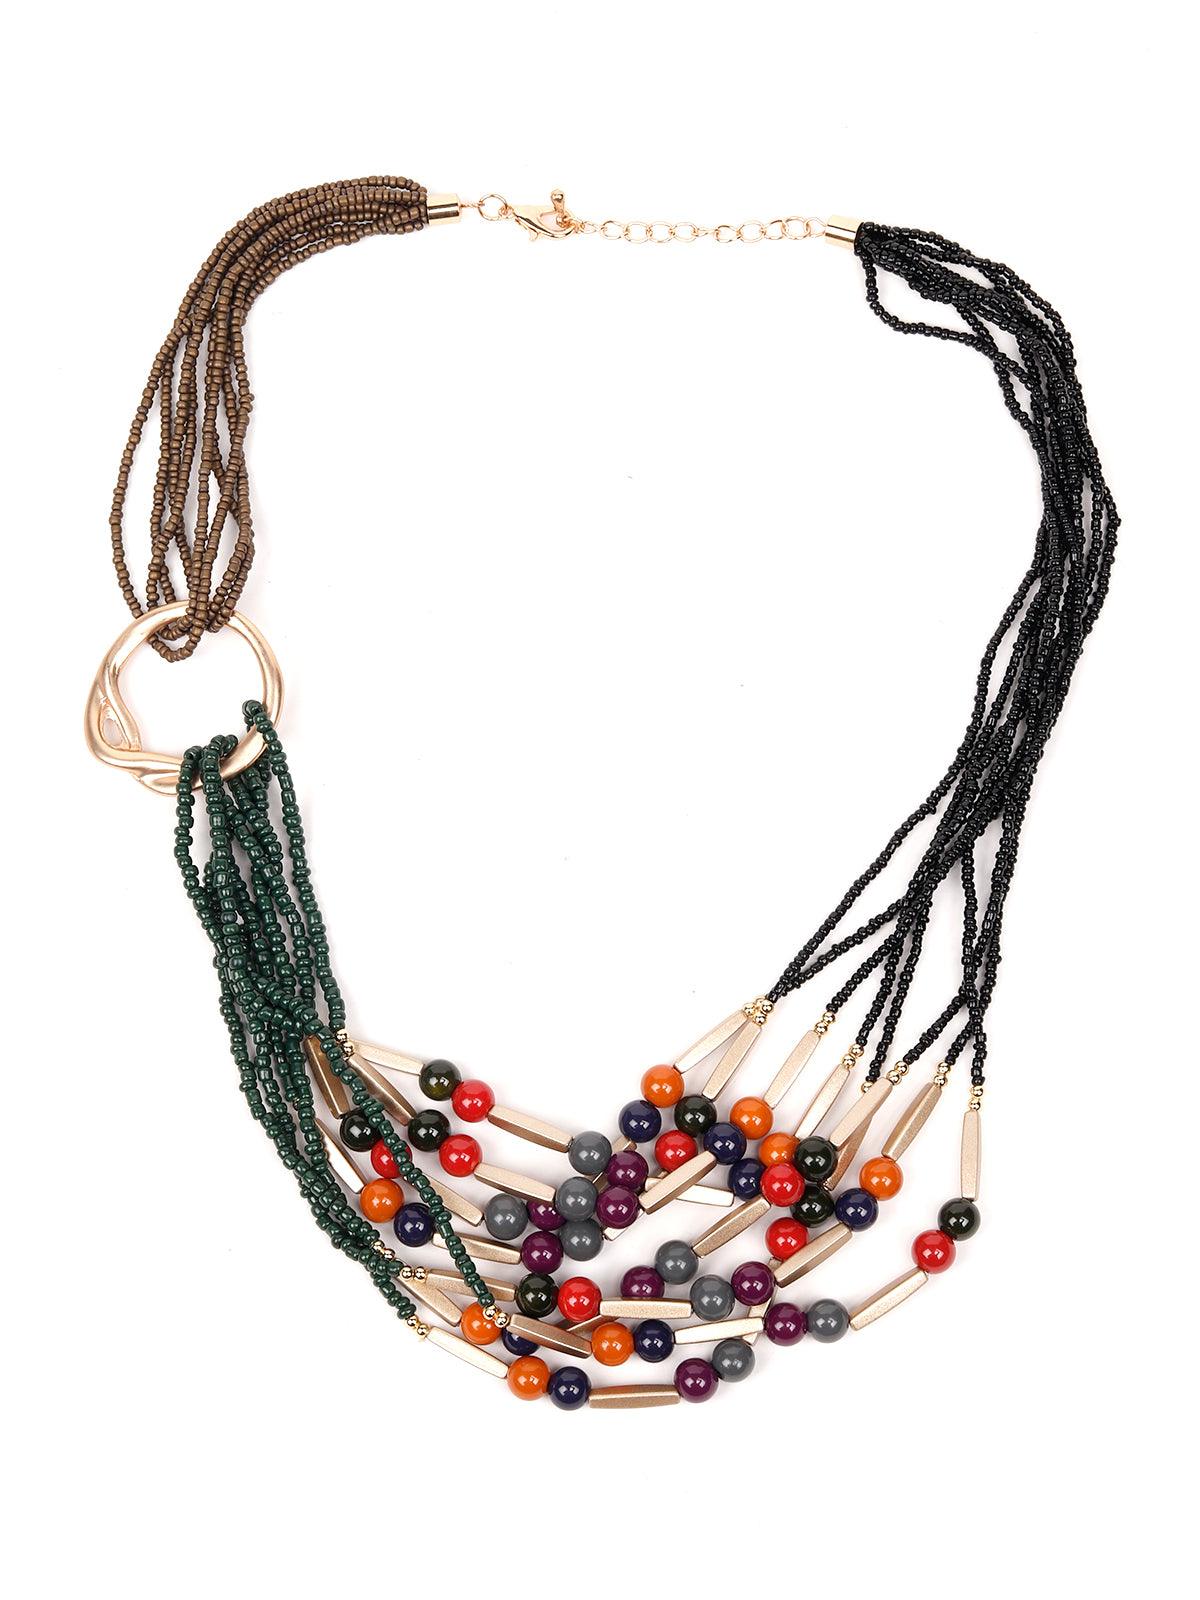 The Multi-Coloured Layered Statement Necklace For Women - Odette